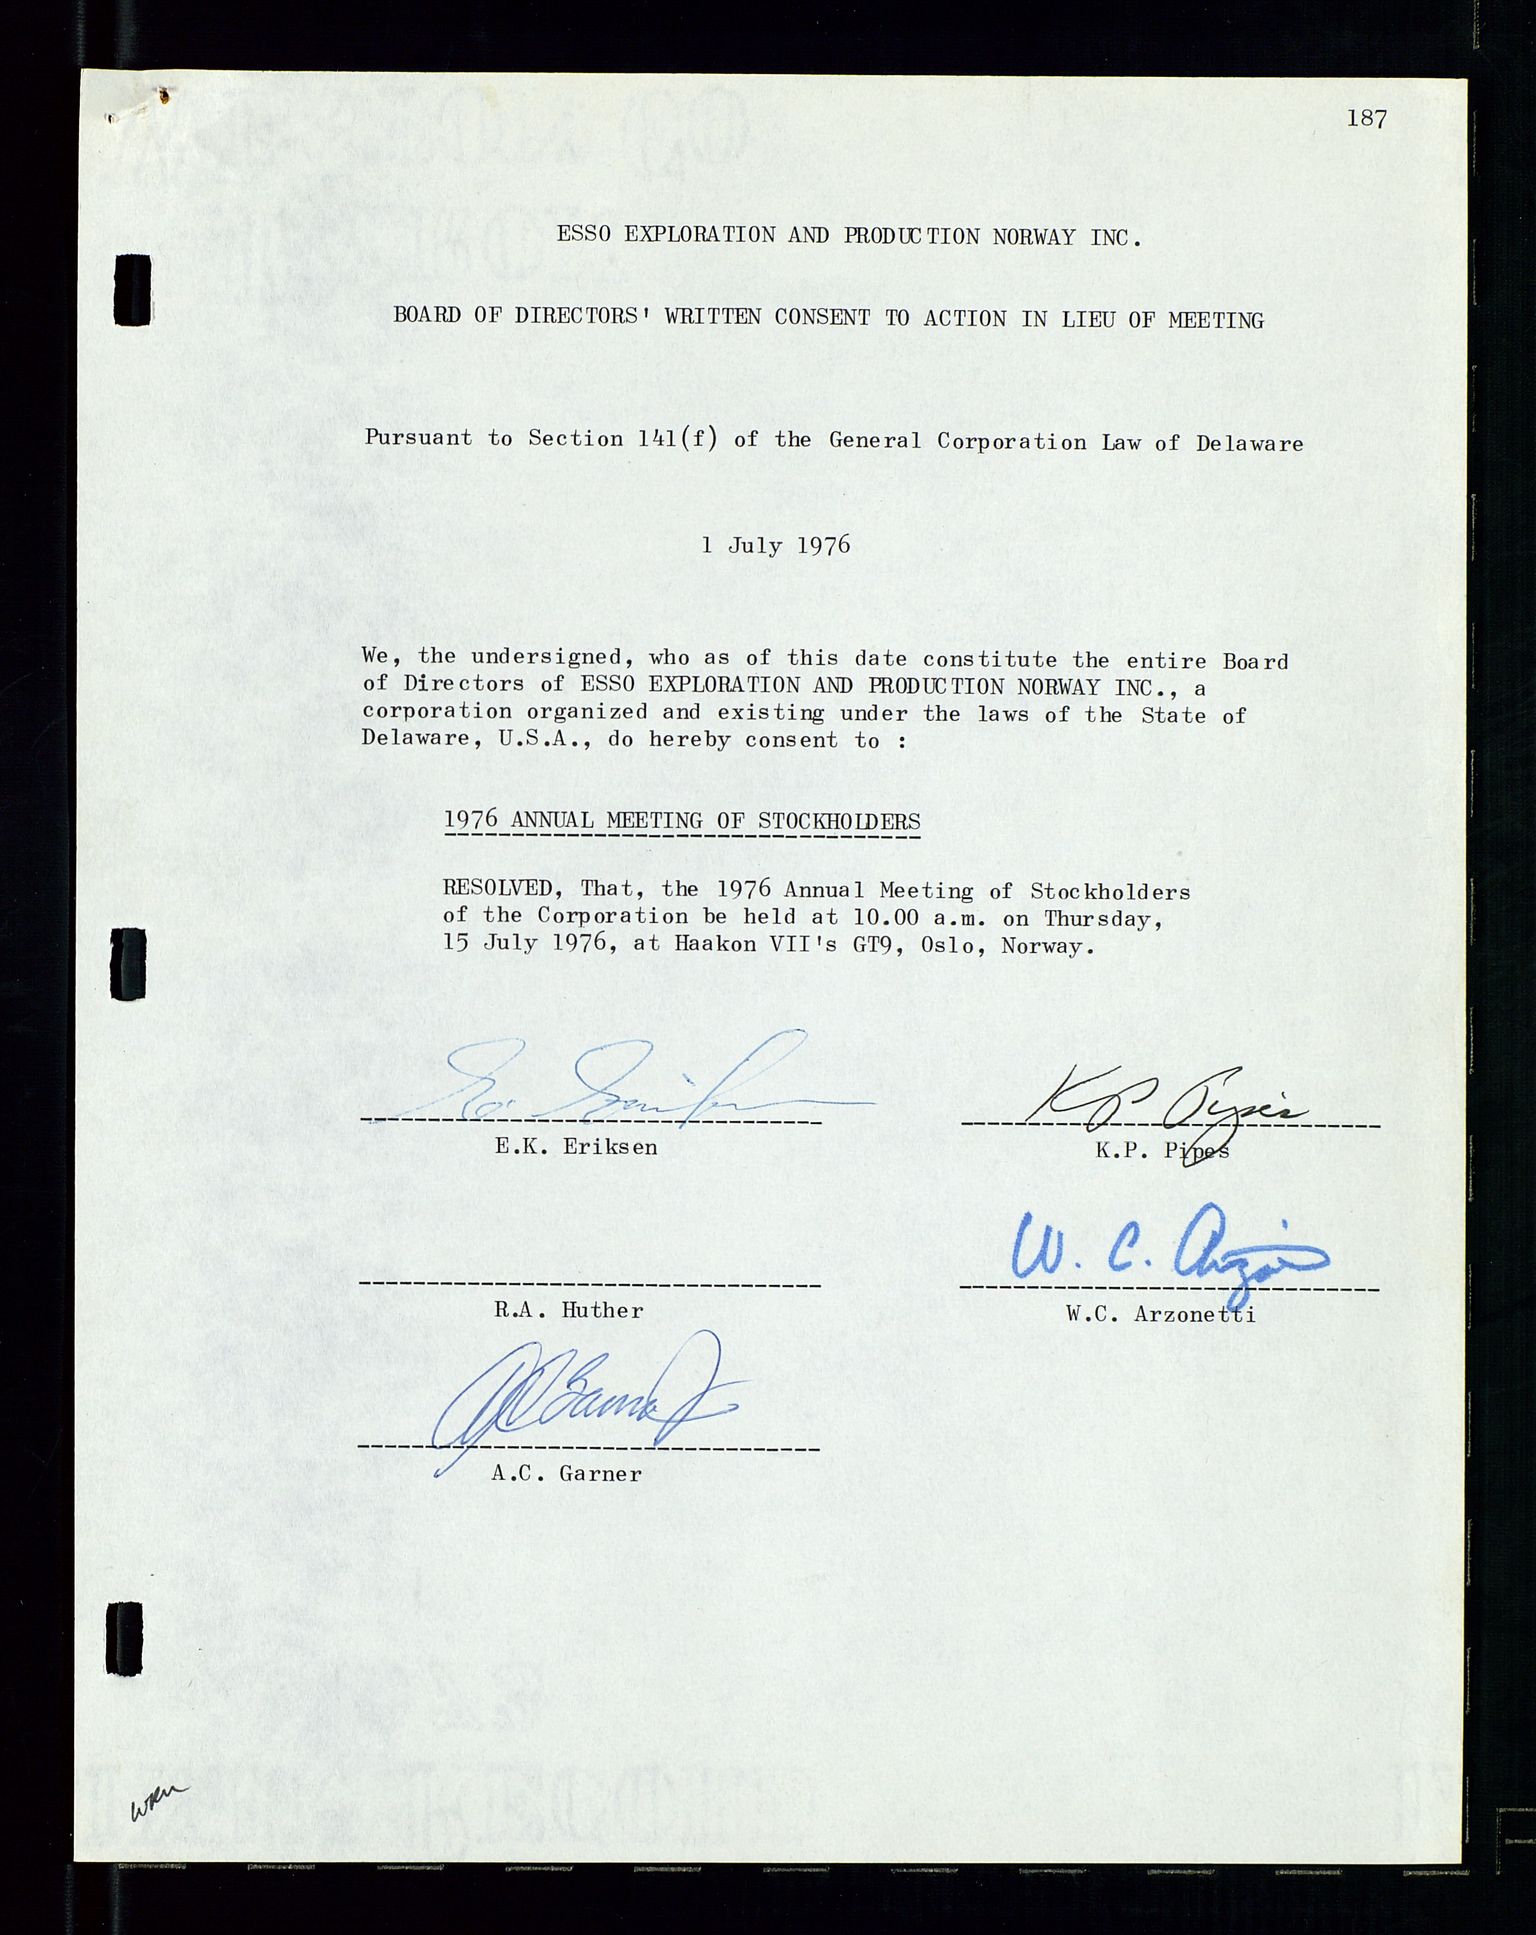 Pa 1512 - Esso Exploration and Production Norway Inc., SAST/A-101917/A/Aa/L0001/0002: Styredokumenter / Corporate records, Board meeting minutes, Agreements, Stocholder meetings, 1975-1979, s. 29